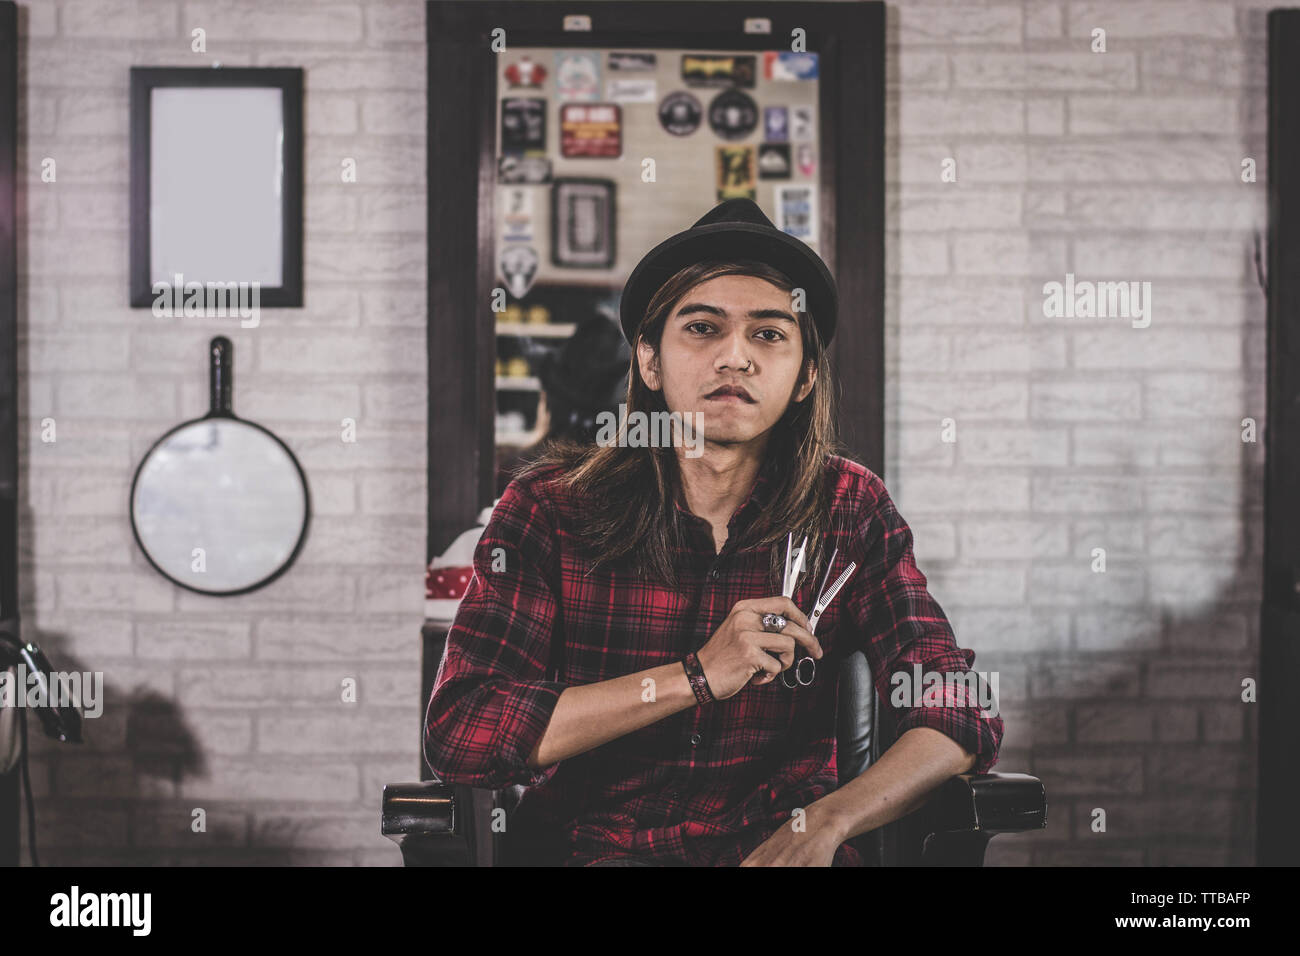 https://c8.alamy.com/comp/TTBAFP/portrait-of-confident-young-long-hair-stylist-barber-sitting-at-vintage-barbershop-chair-holding-twos-scissor-facing-and-looking-at-camera-TTBAFP.jpg